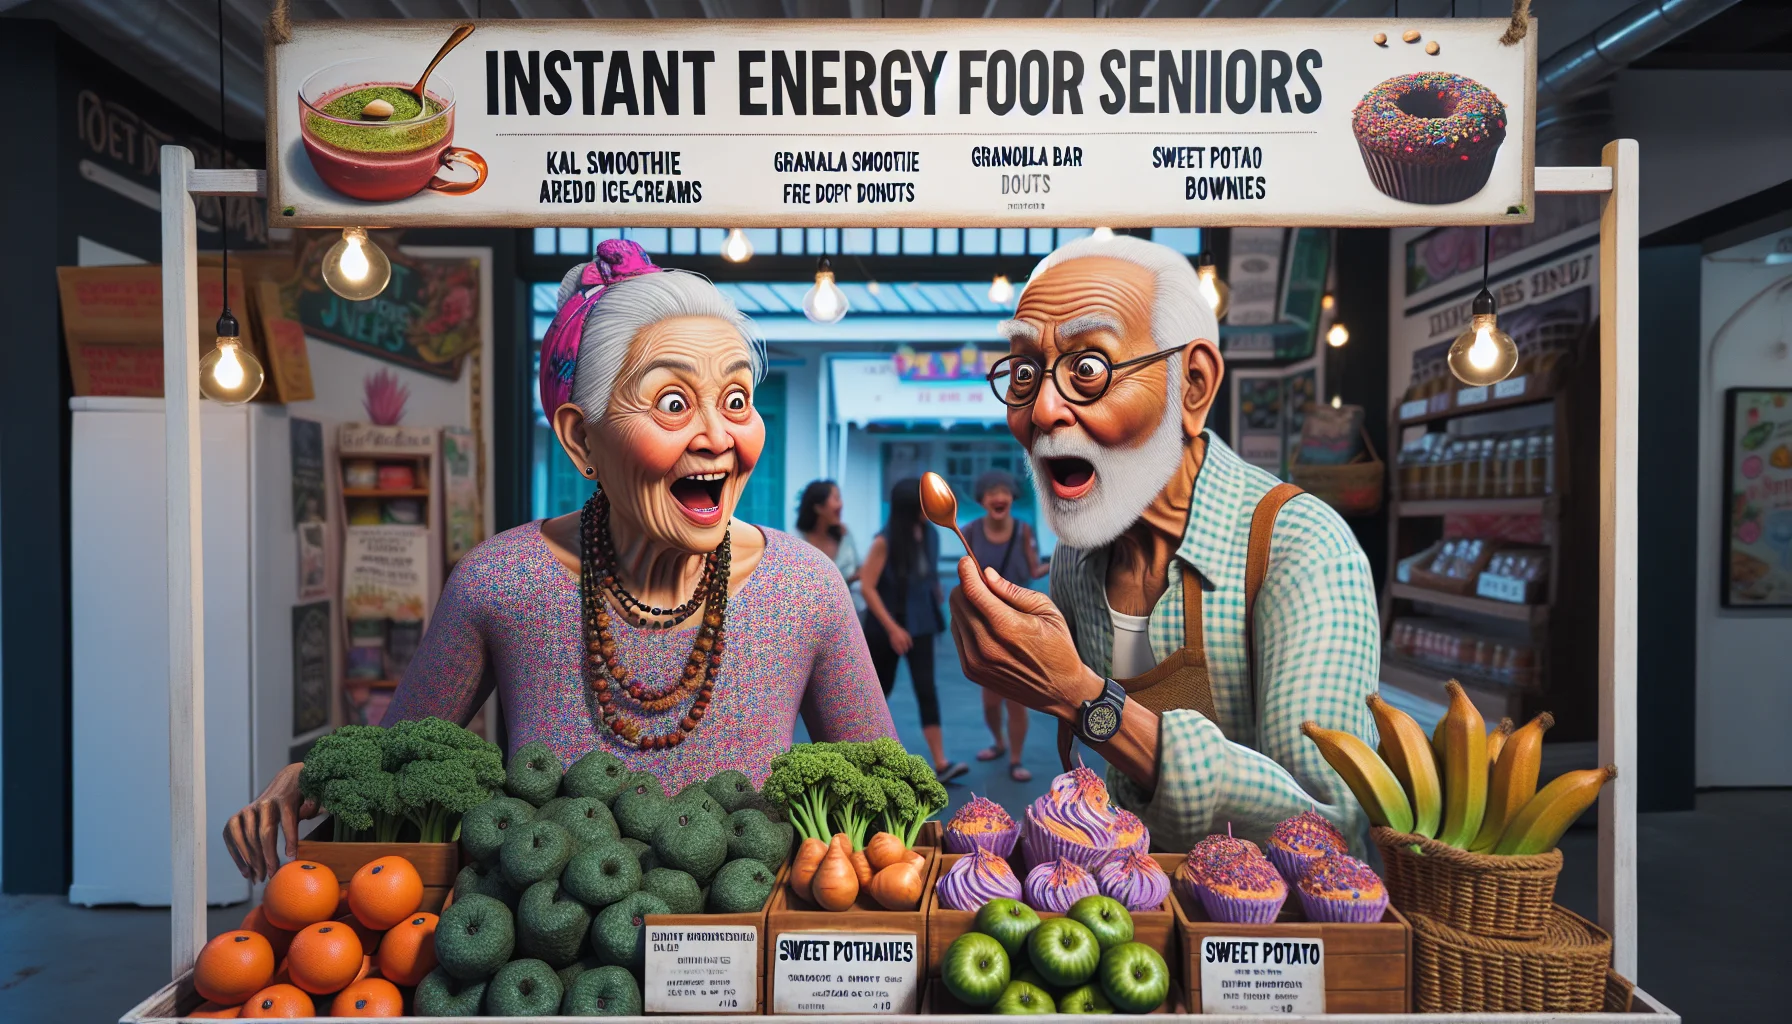 A whimsical, hyper-realistic illustration of an elderly South Asian woman and a Caucasian elderly man in a lively farmer's market. This unique market sells 'Instant Energy Food for Seniors'. Our pair, with surprised and amused expressions, marvel at the unusual foods like kale smoothie ice-creams, granola bar donuts, and sweet potato brownies. The image captures the mixture of humour and the unexpected in everyday life, along with the nuances of maintaining a healthy diet in old age.